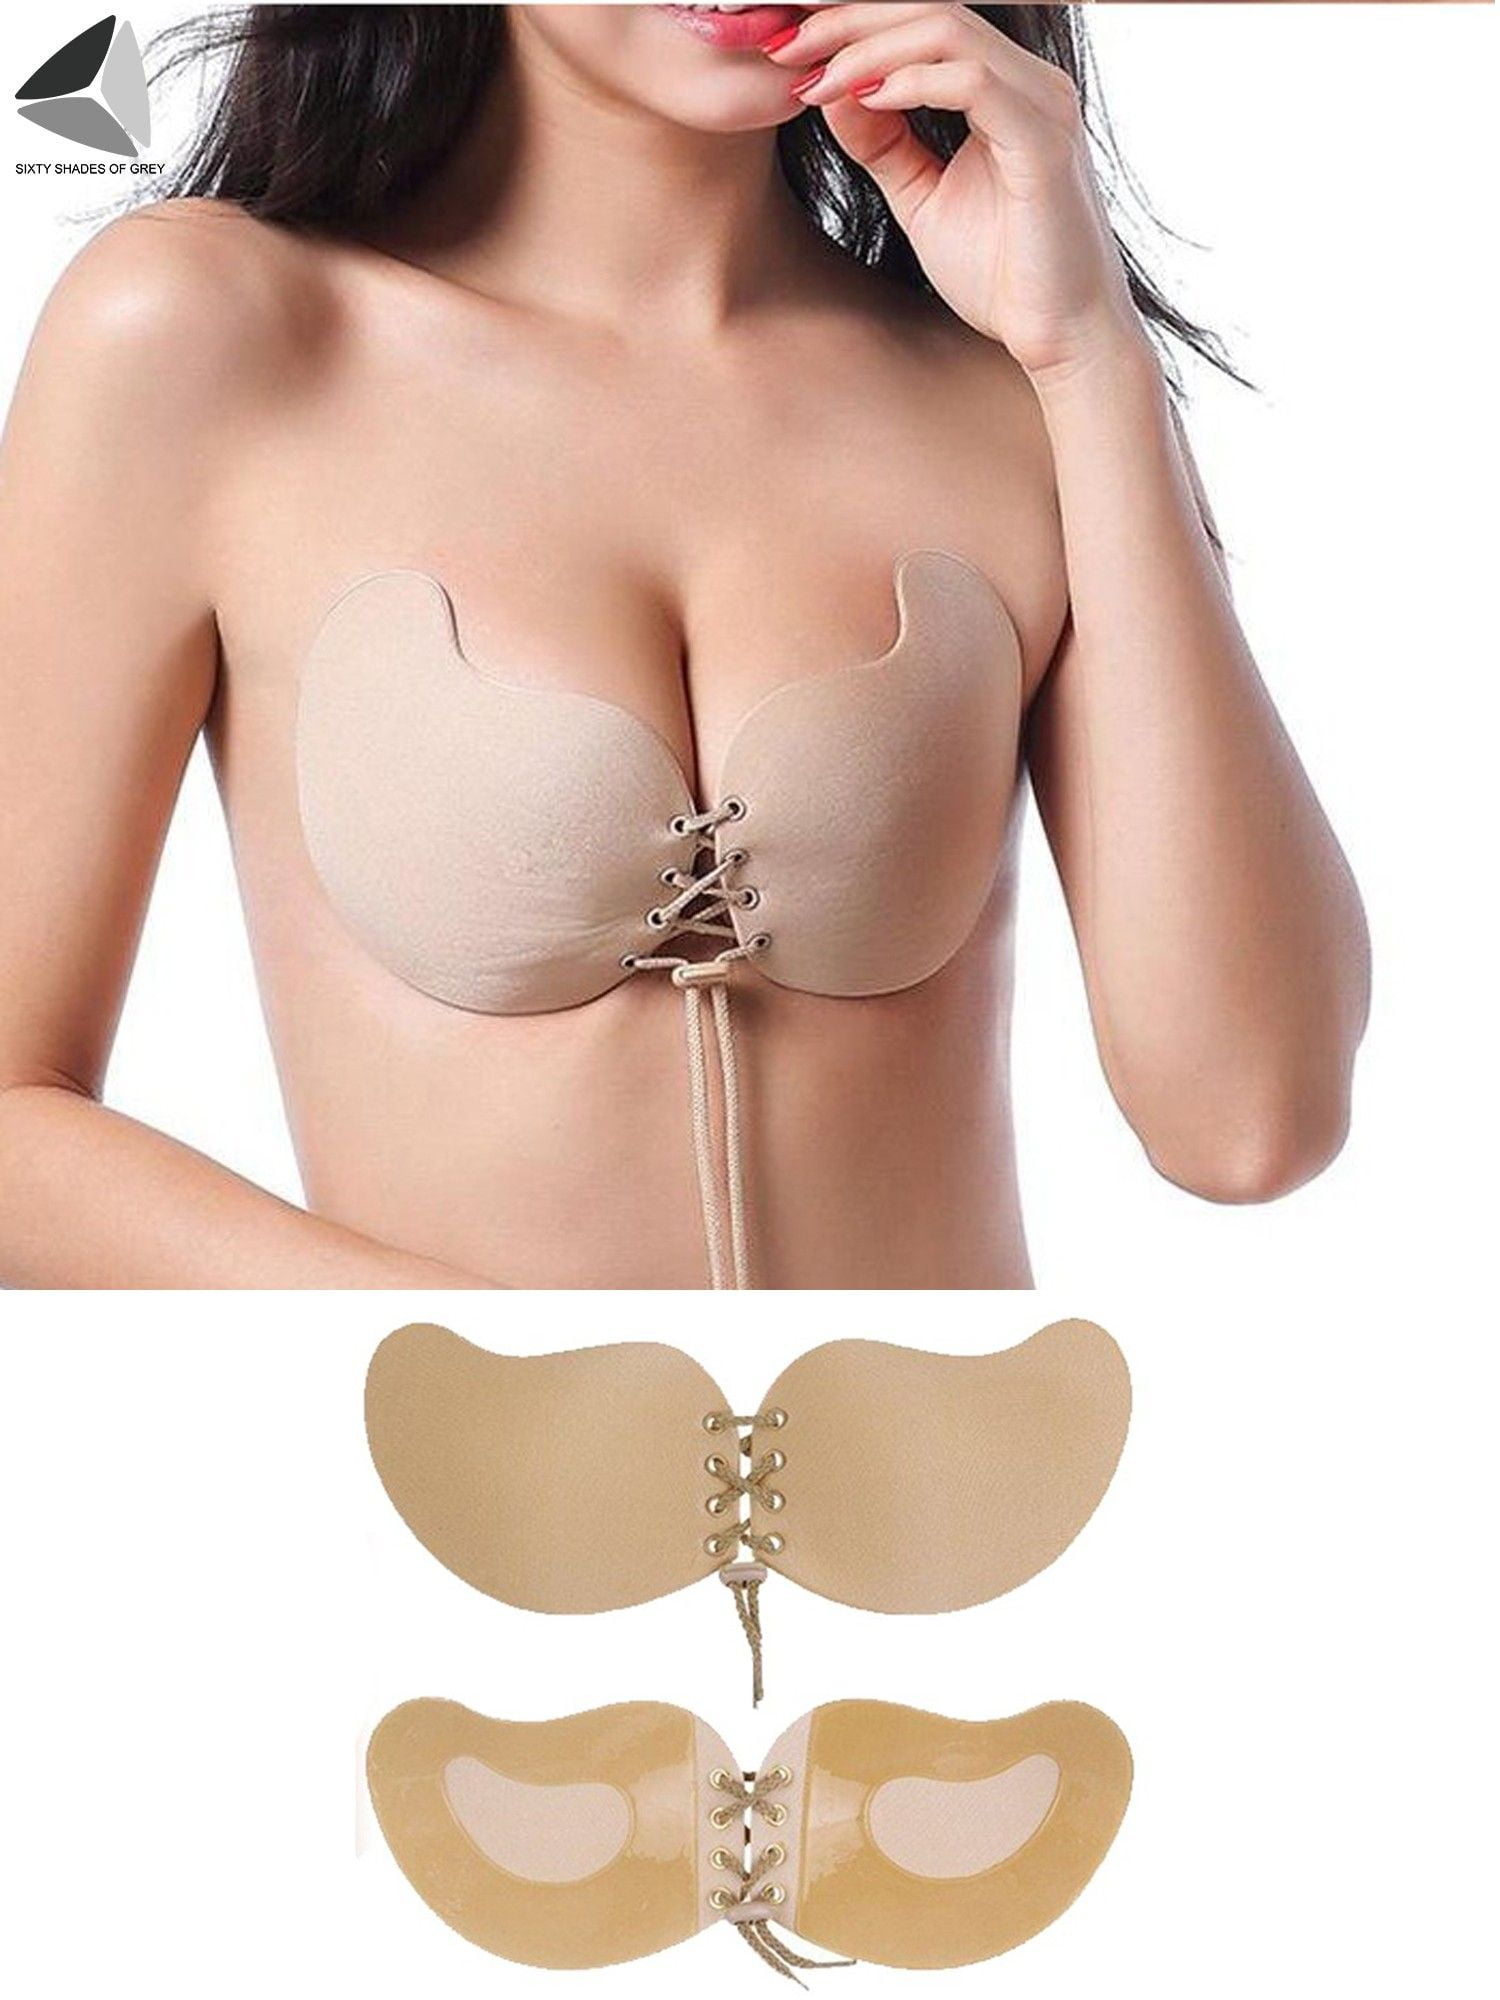 PULLIMORE Women's Push Up Invisible Bras Breathable Self-Adhesive